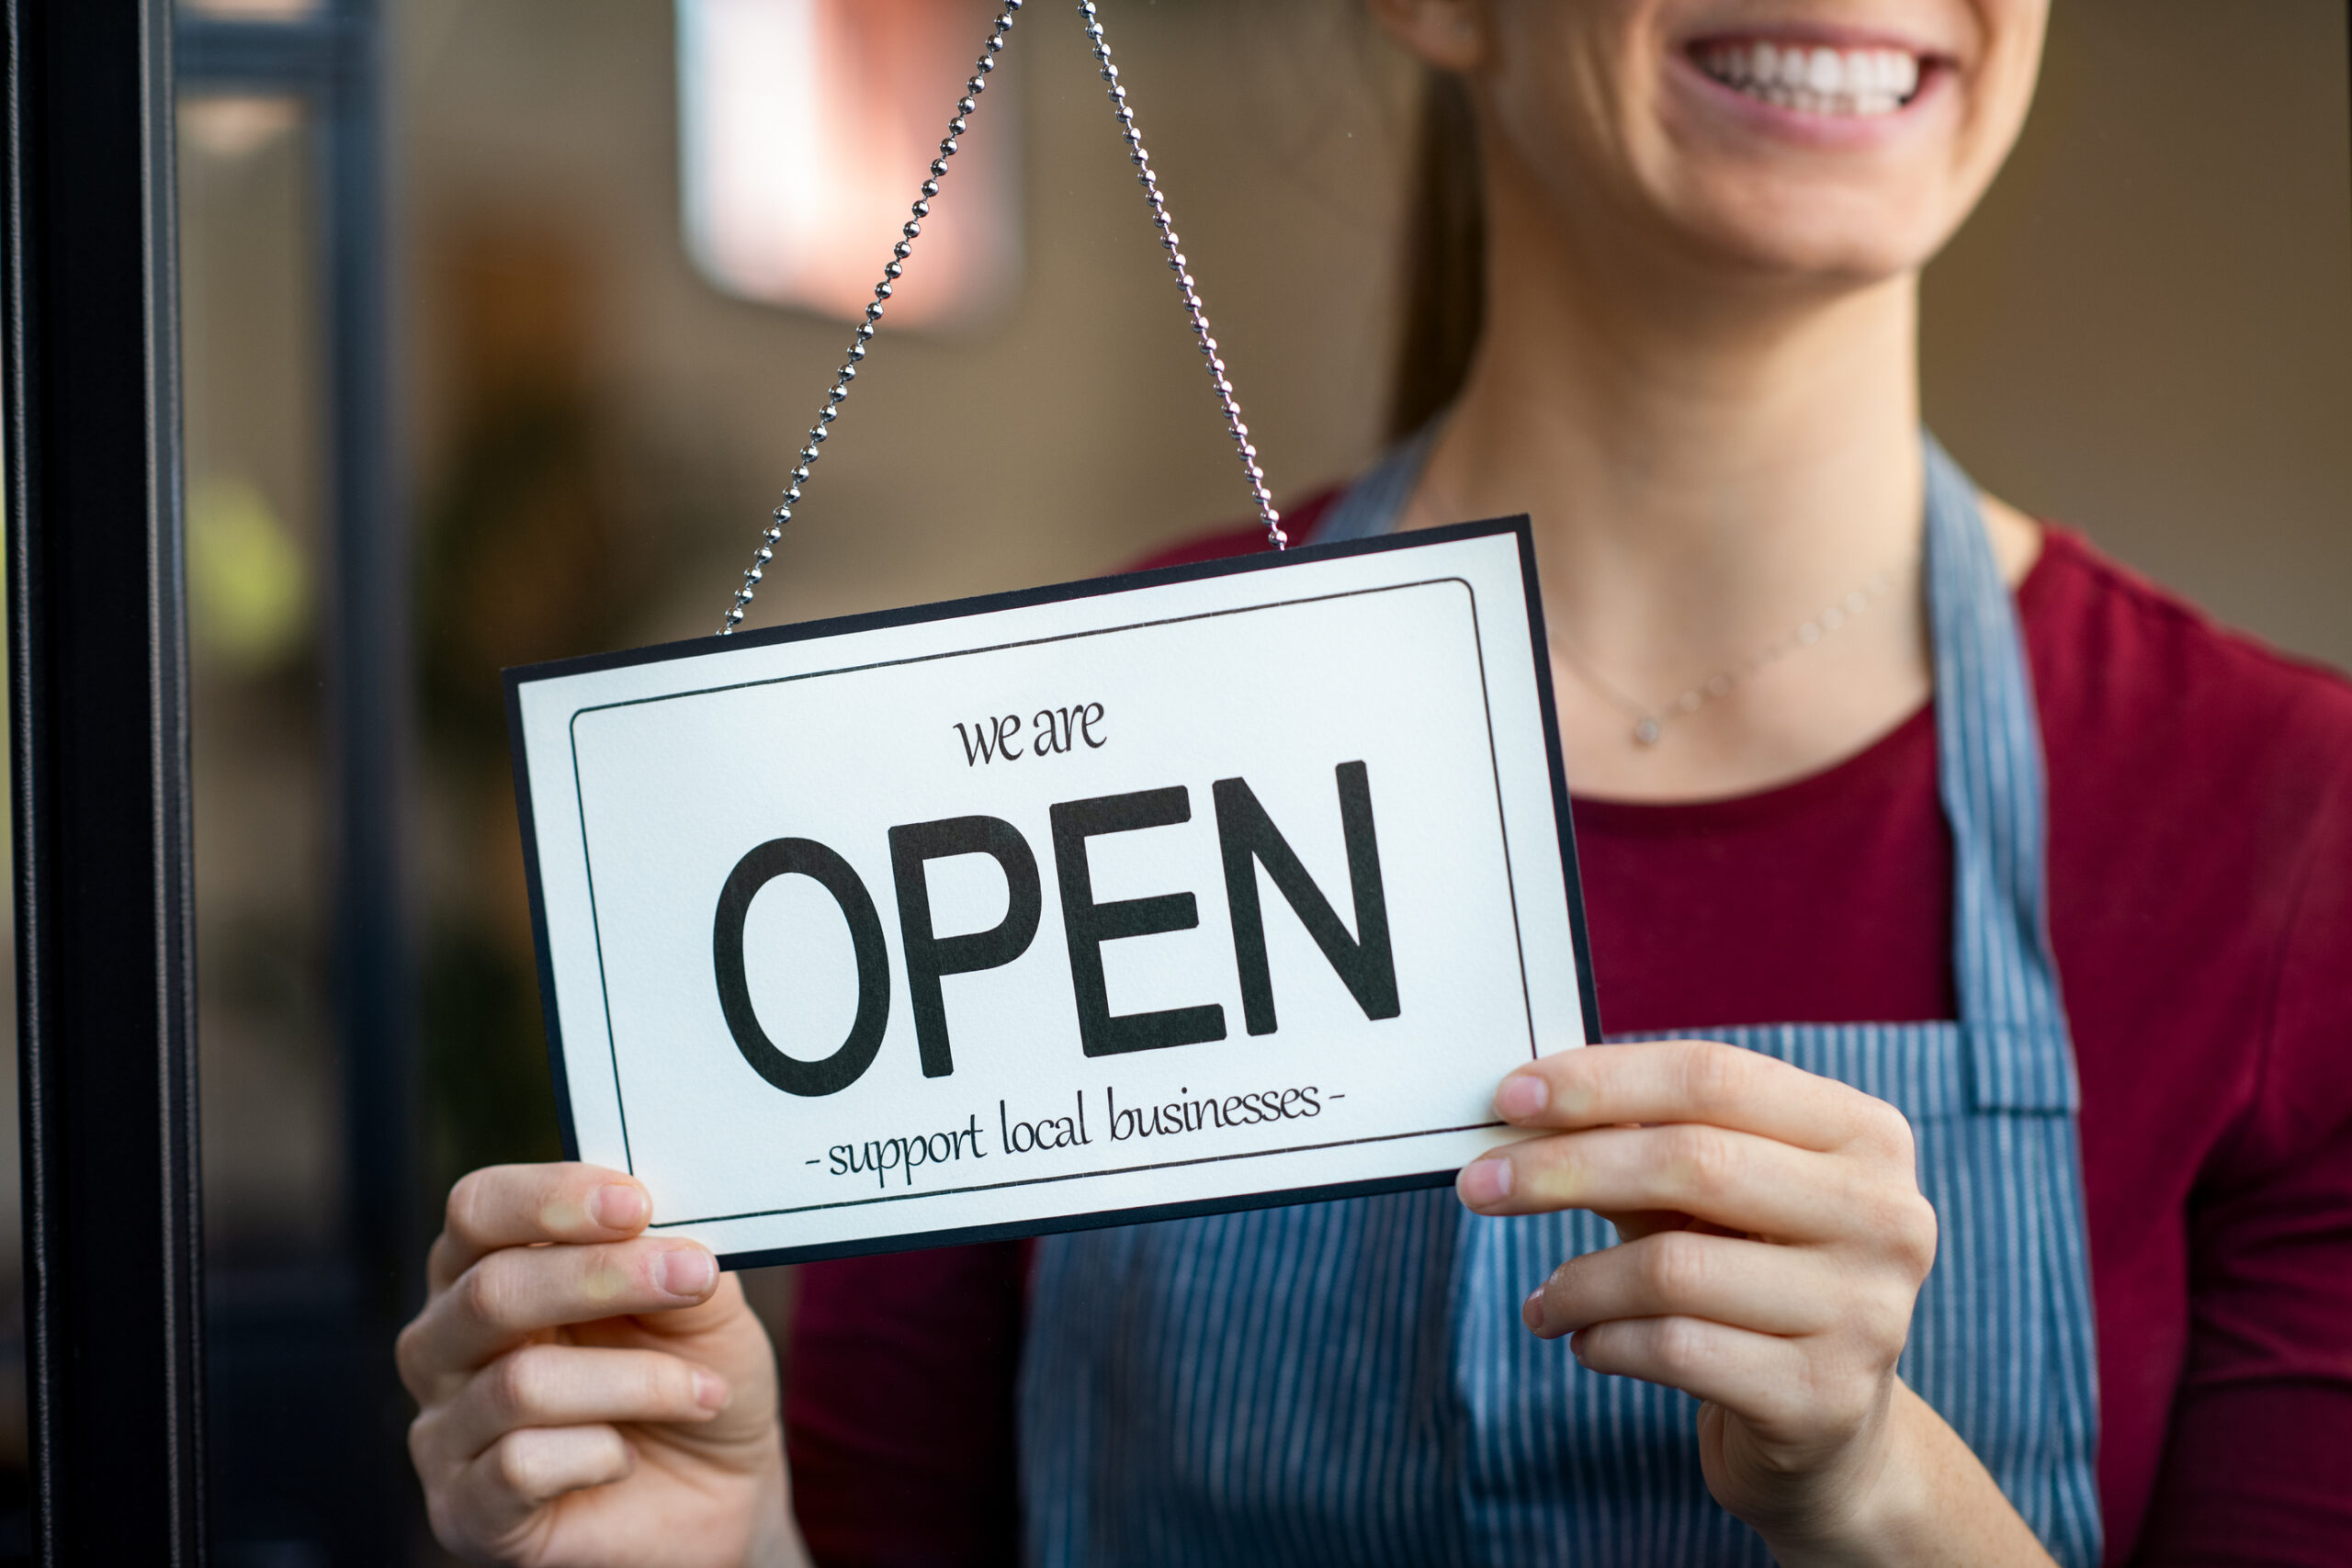 What You Should Communicate When Re-Opening Your Business